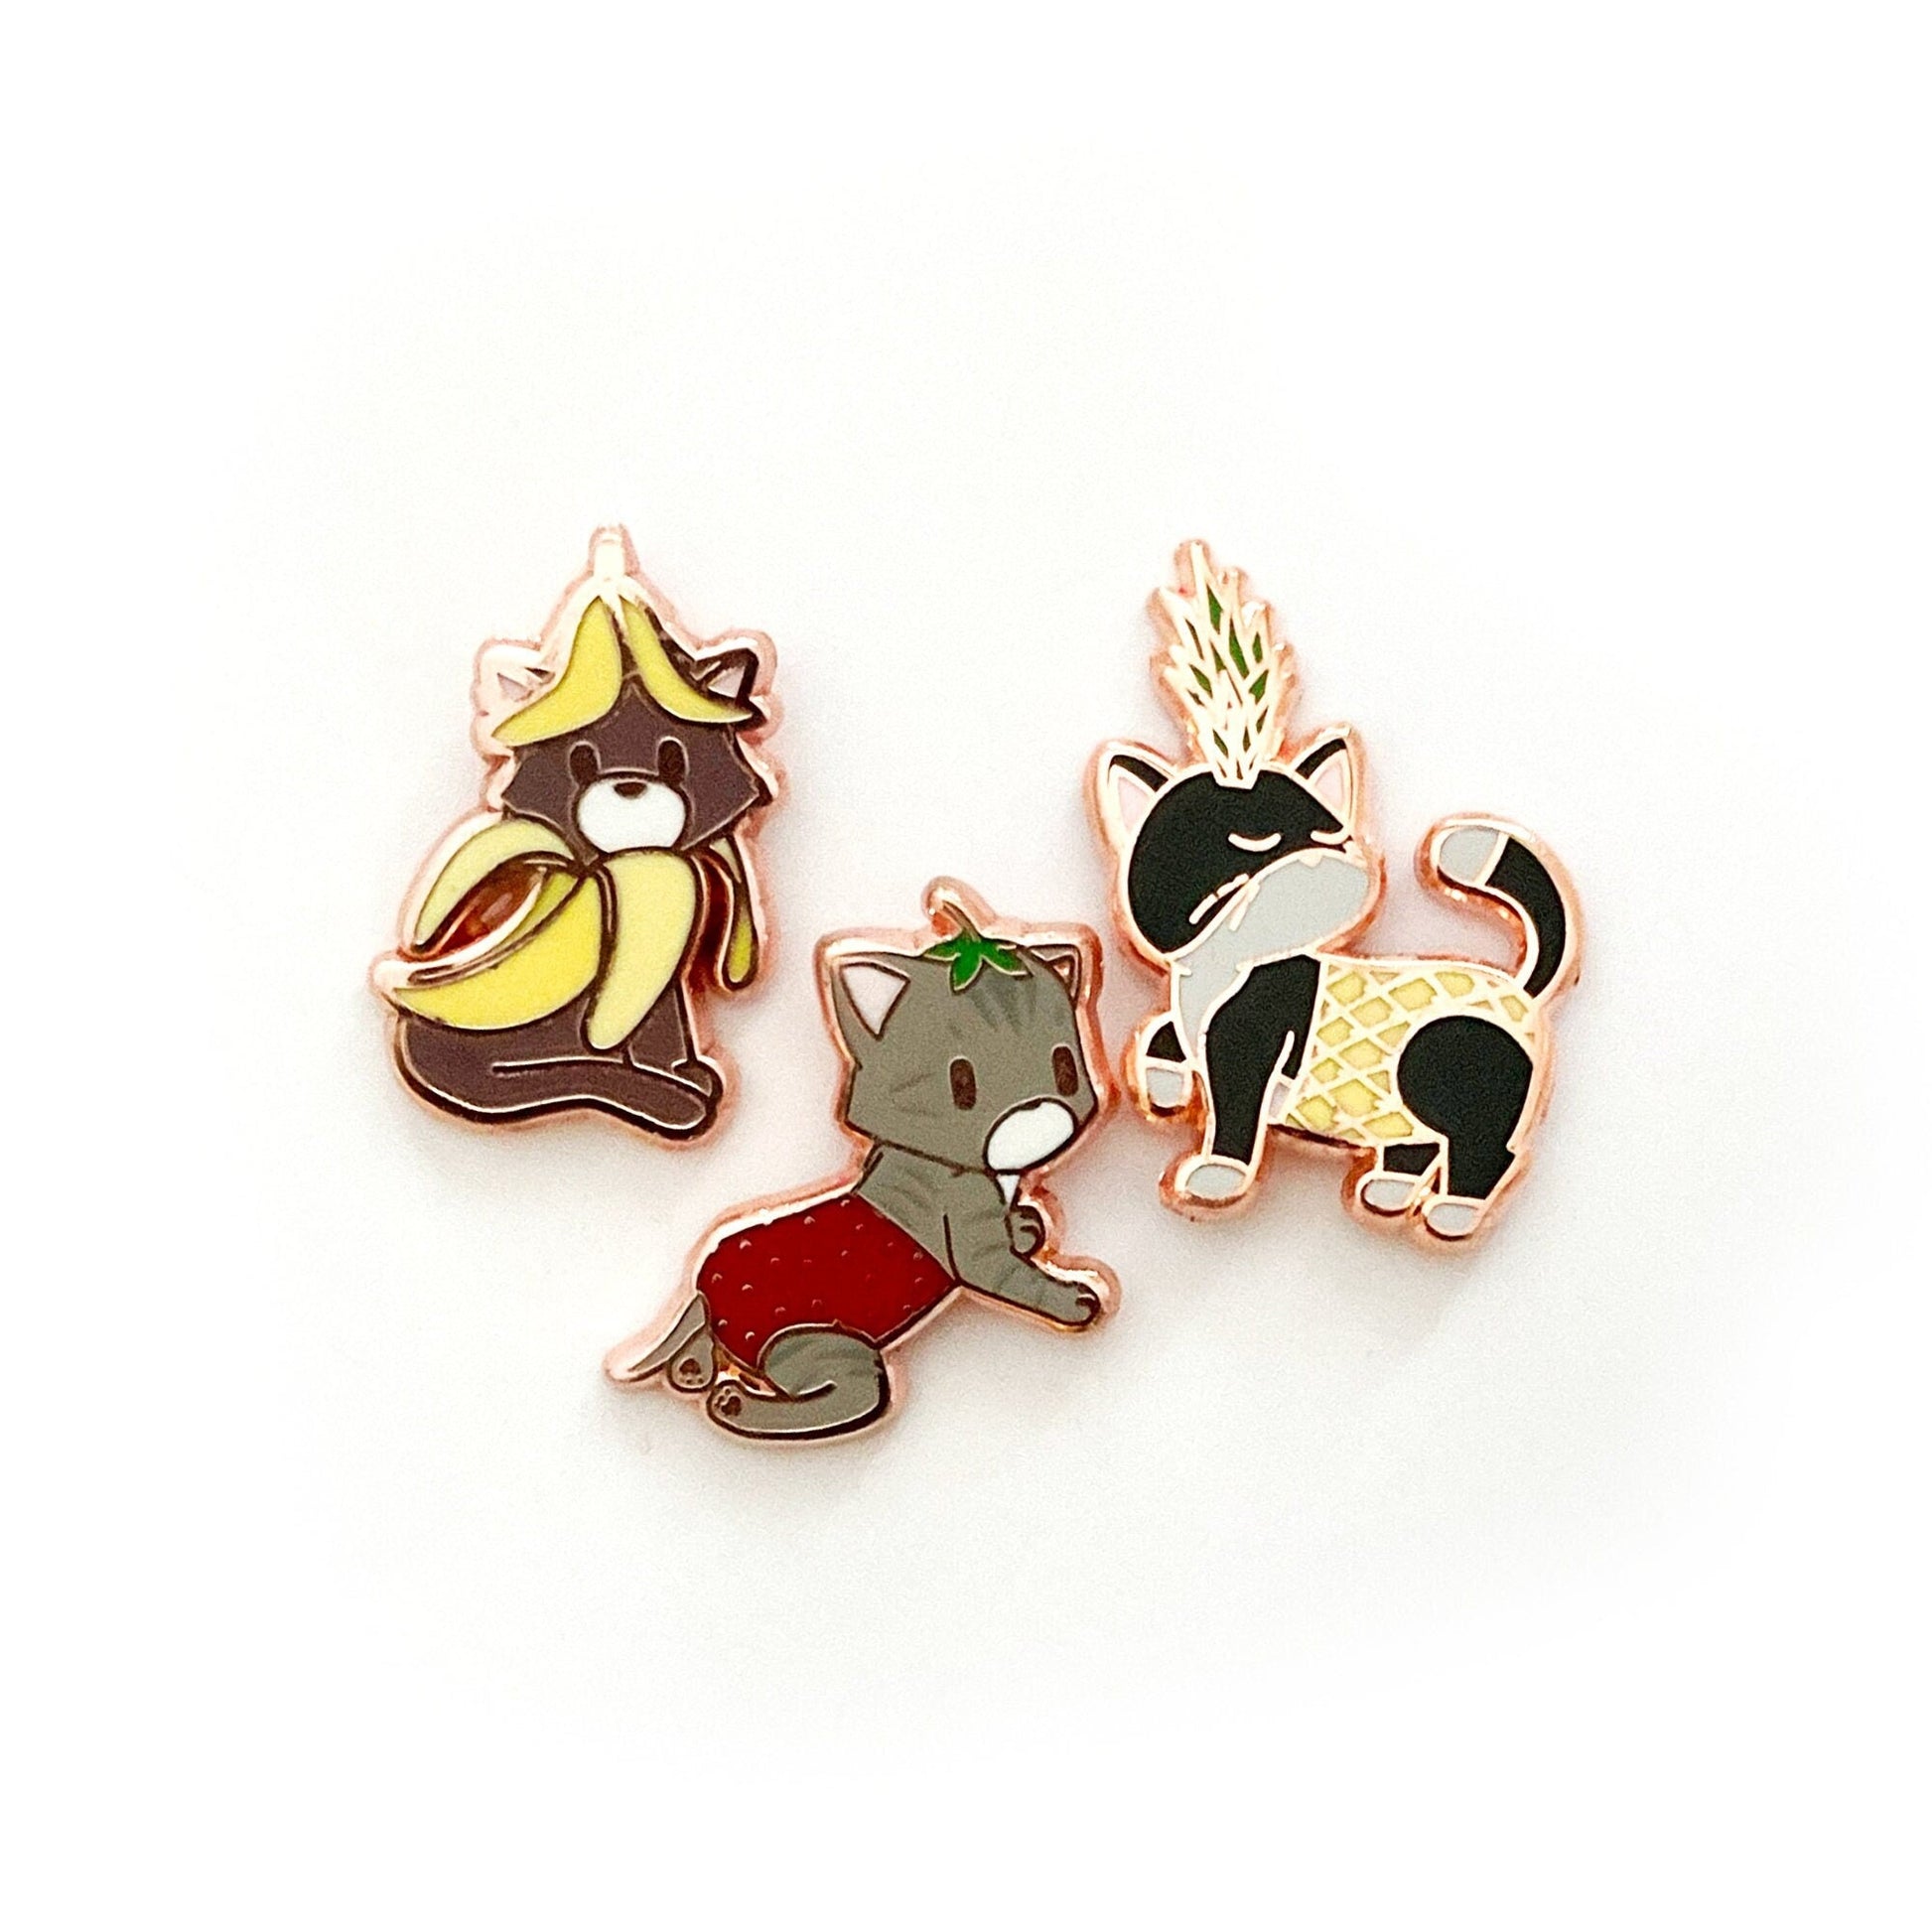 Fruit Salad Kitties Mini Collection, Set of 3 (Banana, Pineapple, Strawberry) - Small 1&quot; Enamel Pins, Pins, Brooches & Lapel Pins